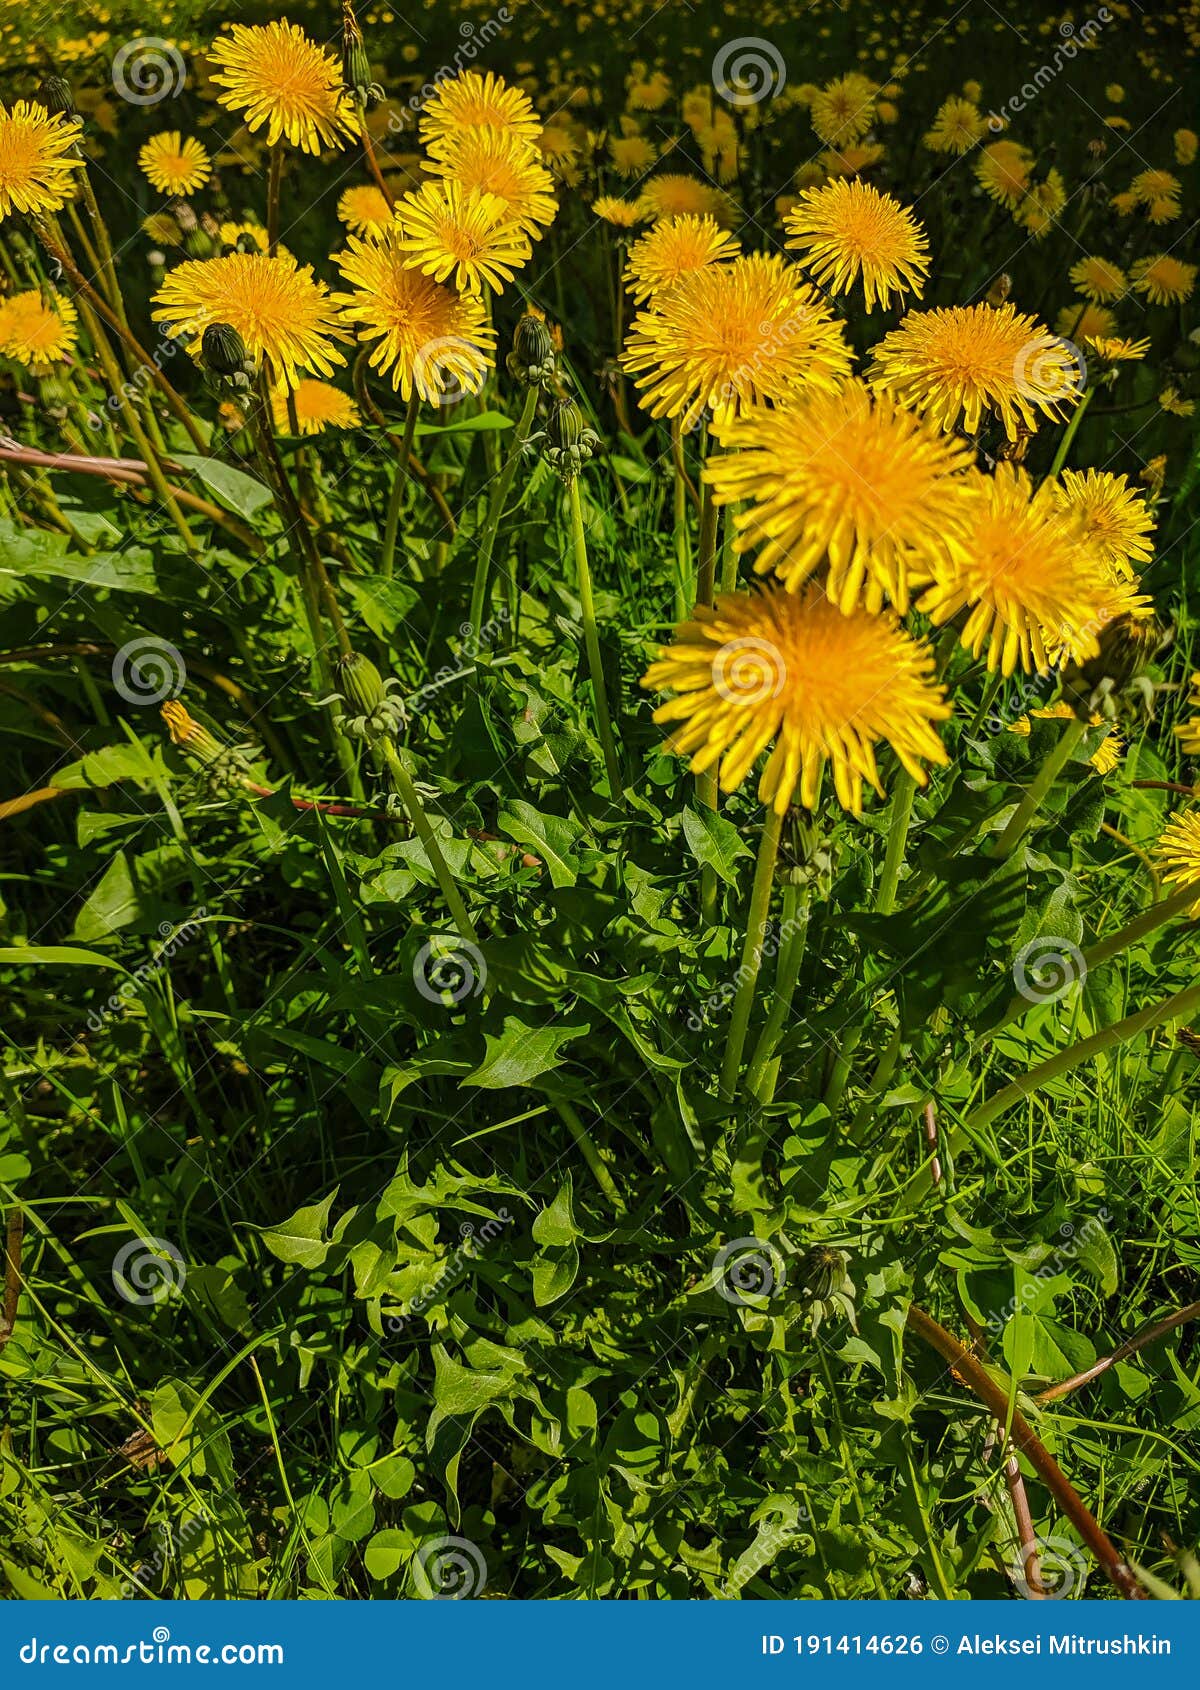 Noyabrsk, Russia - May 30, 2020: Yellow Dandelions Grow in the Green